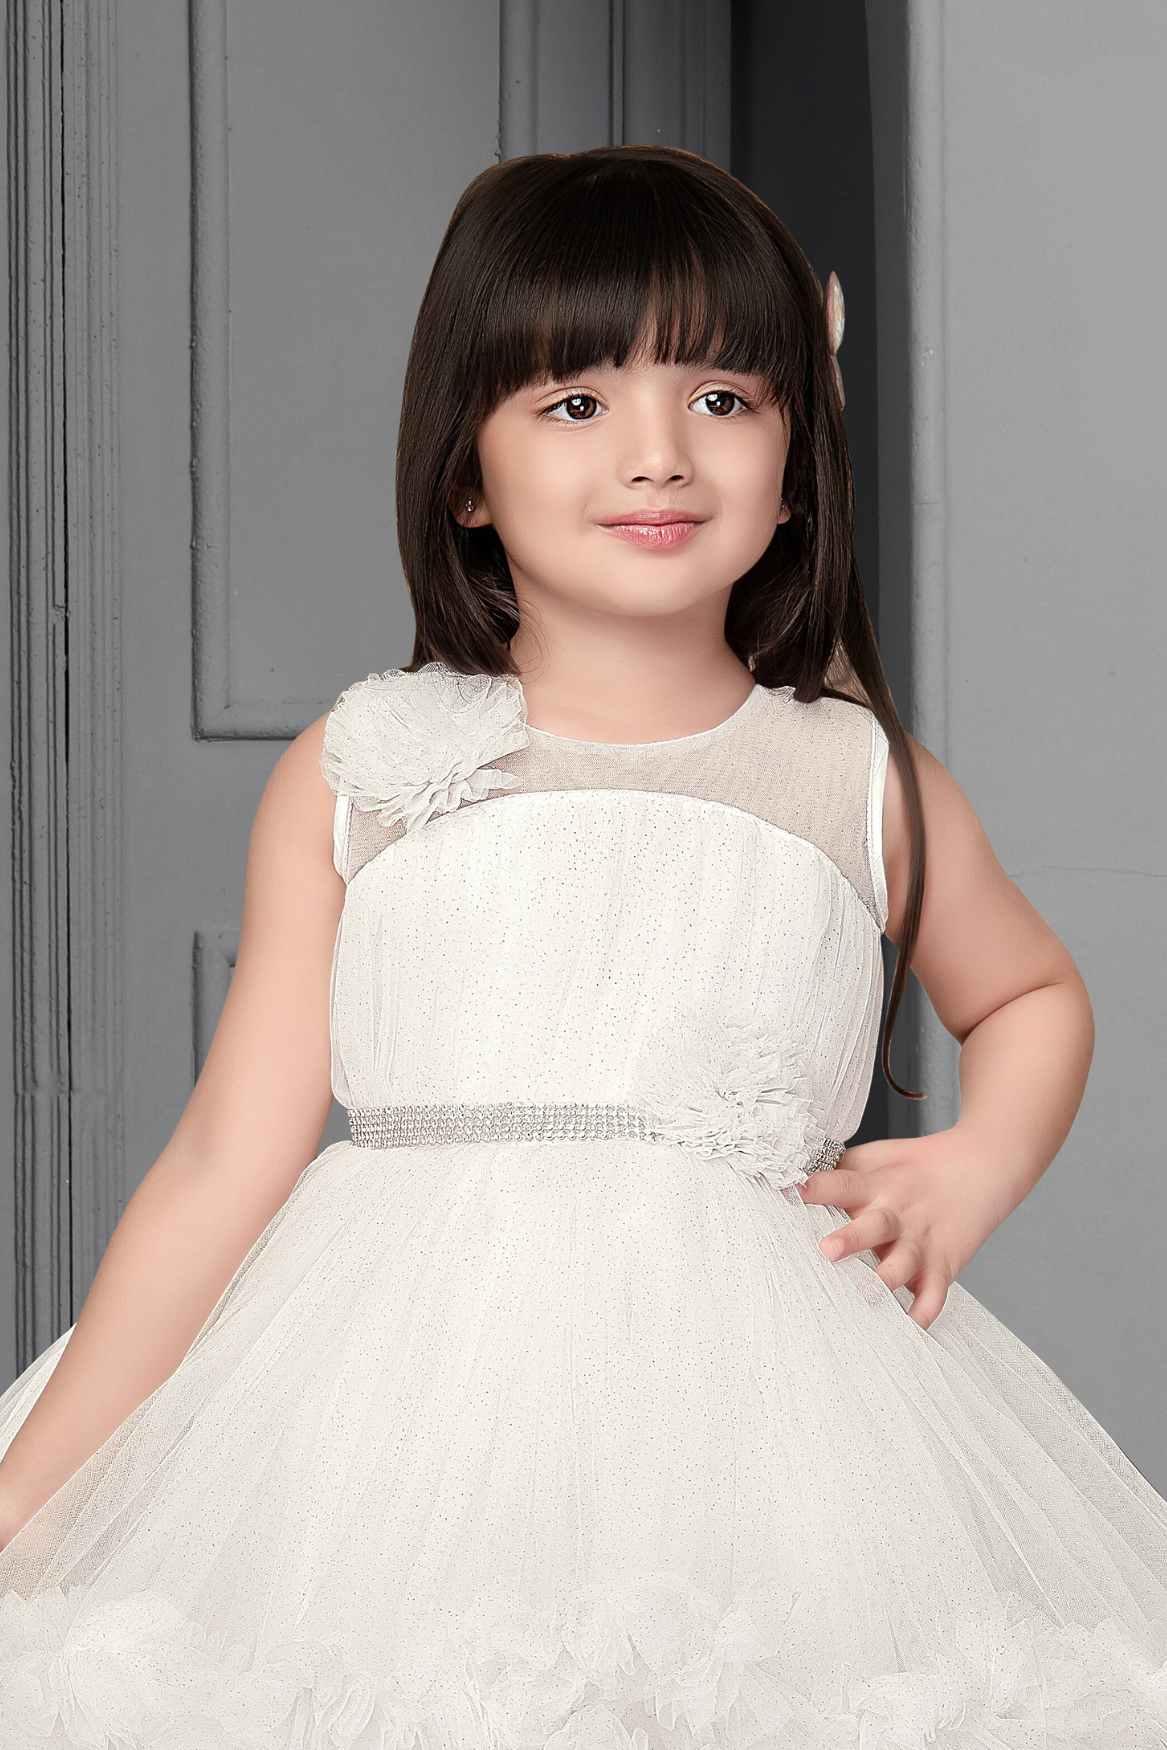 White Ruffle Frock With Floral Embellishment For Girls - Lagorii Kids